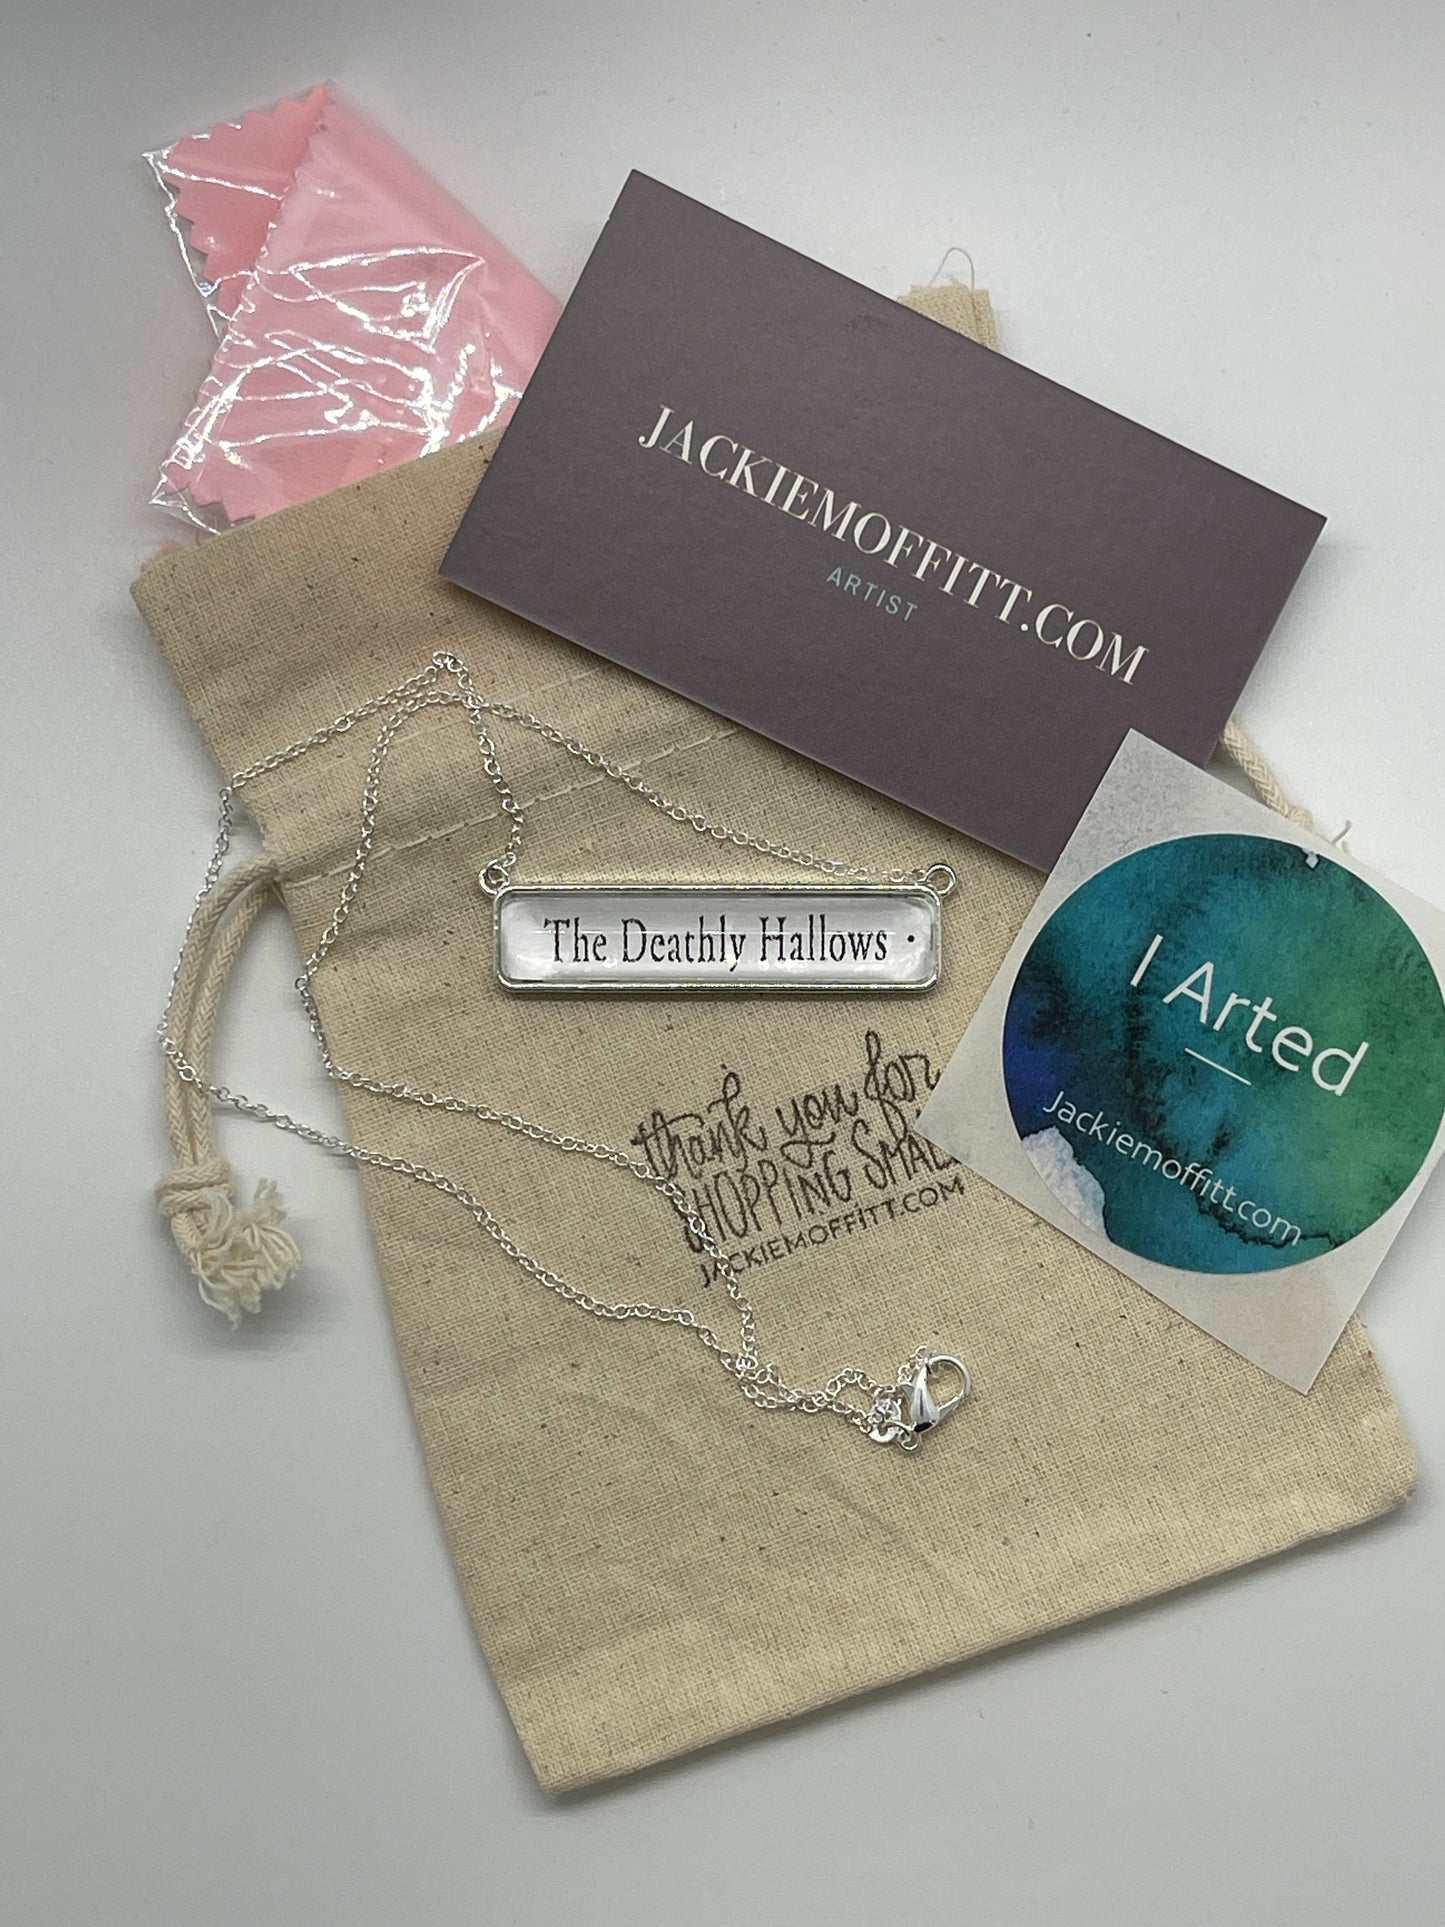 Literary Necklace: Deathly Hallows